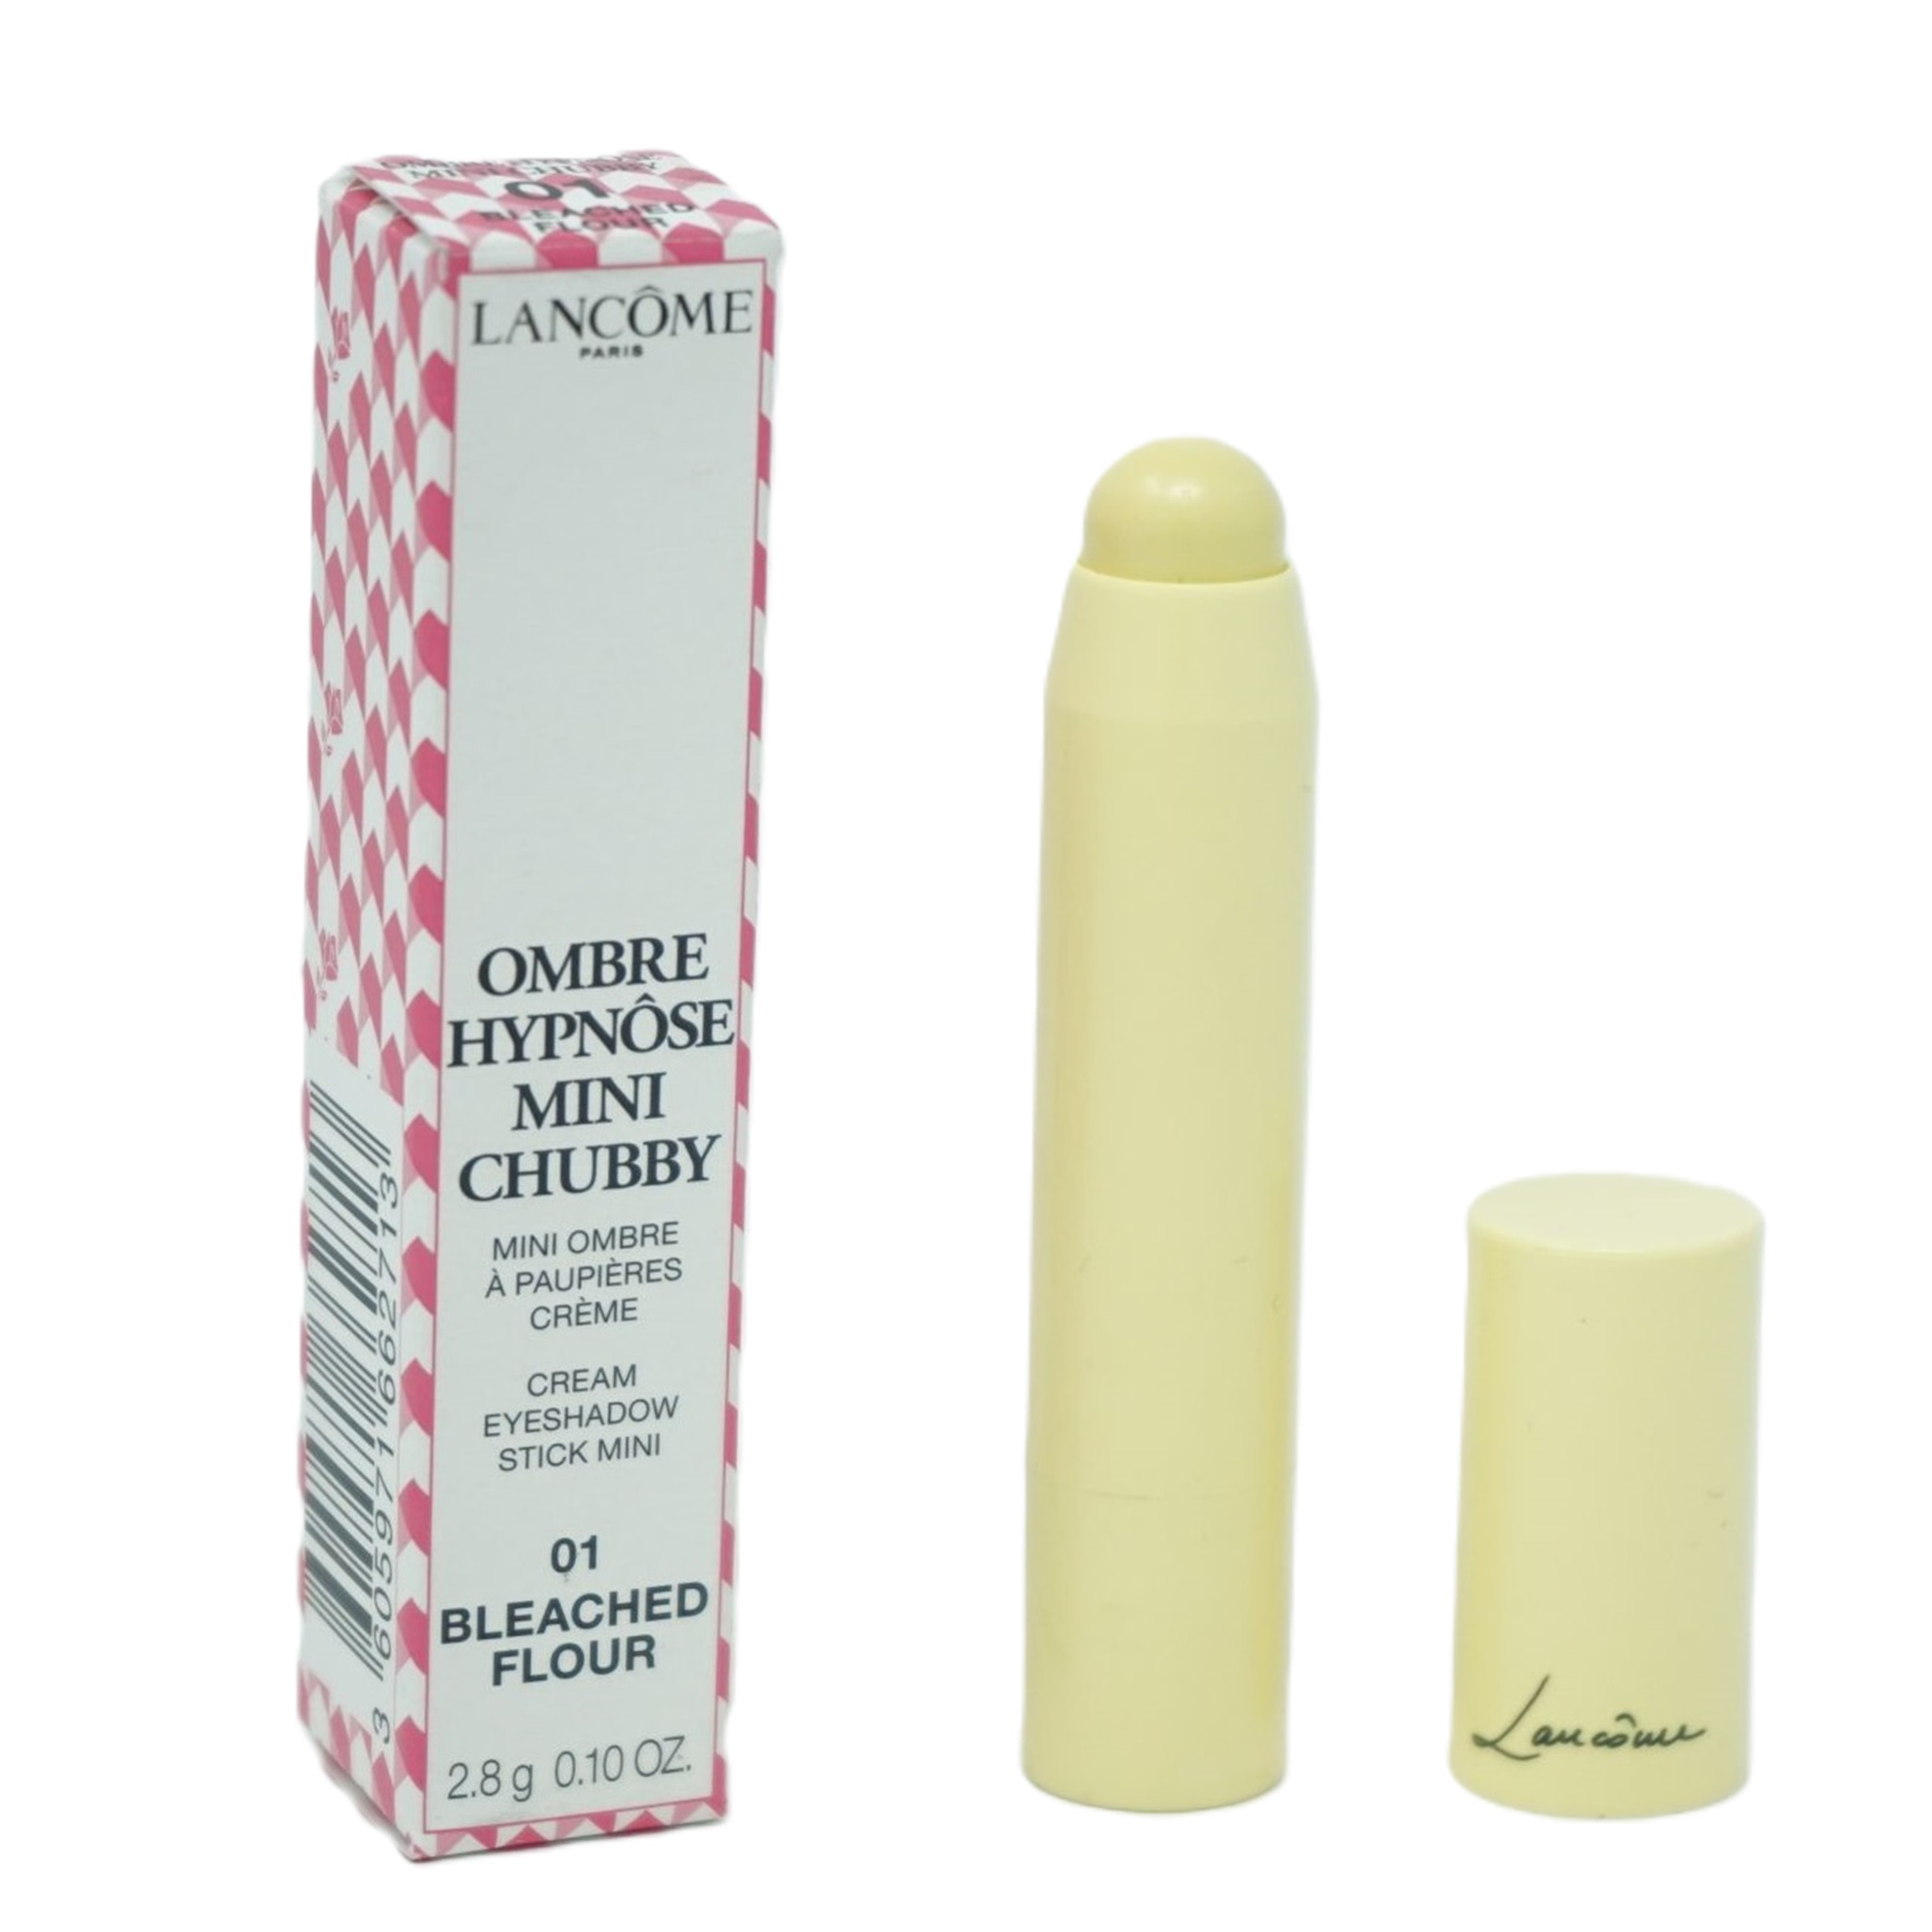 lancome Ombre Hypnose Minin Chubby Eyeshadow Stick 01 Bleached Flour